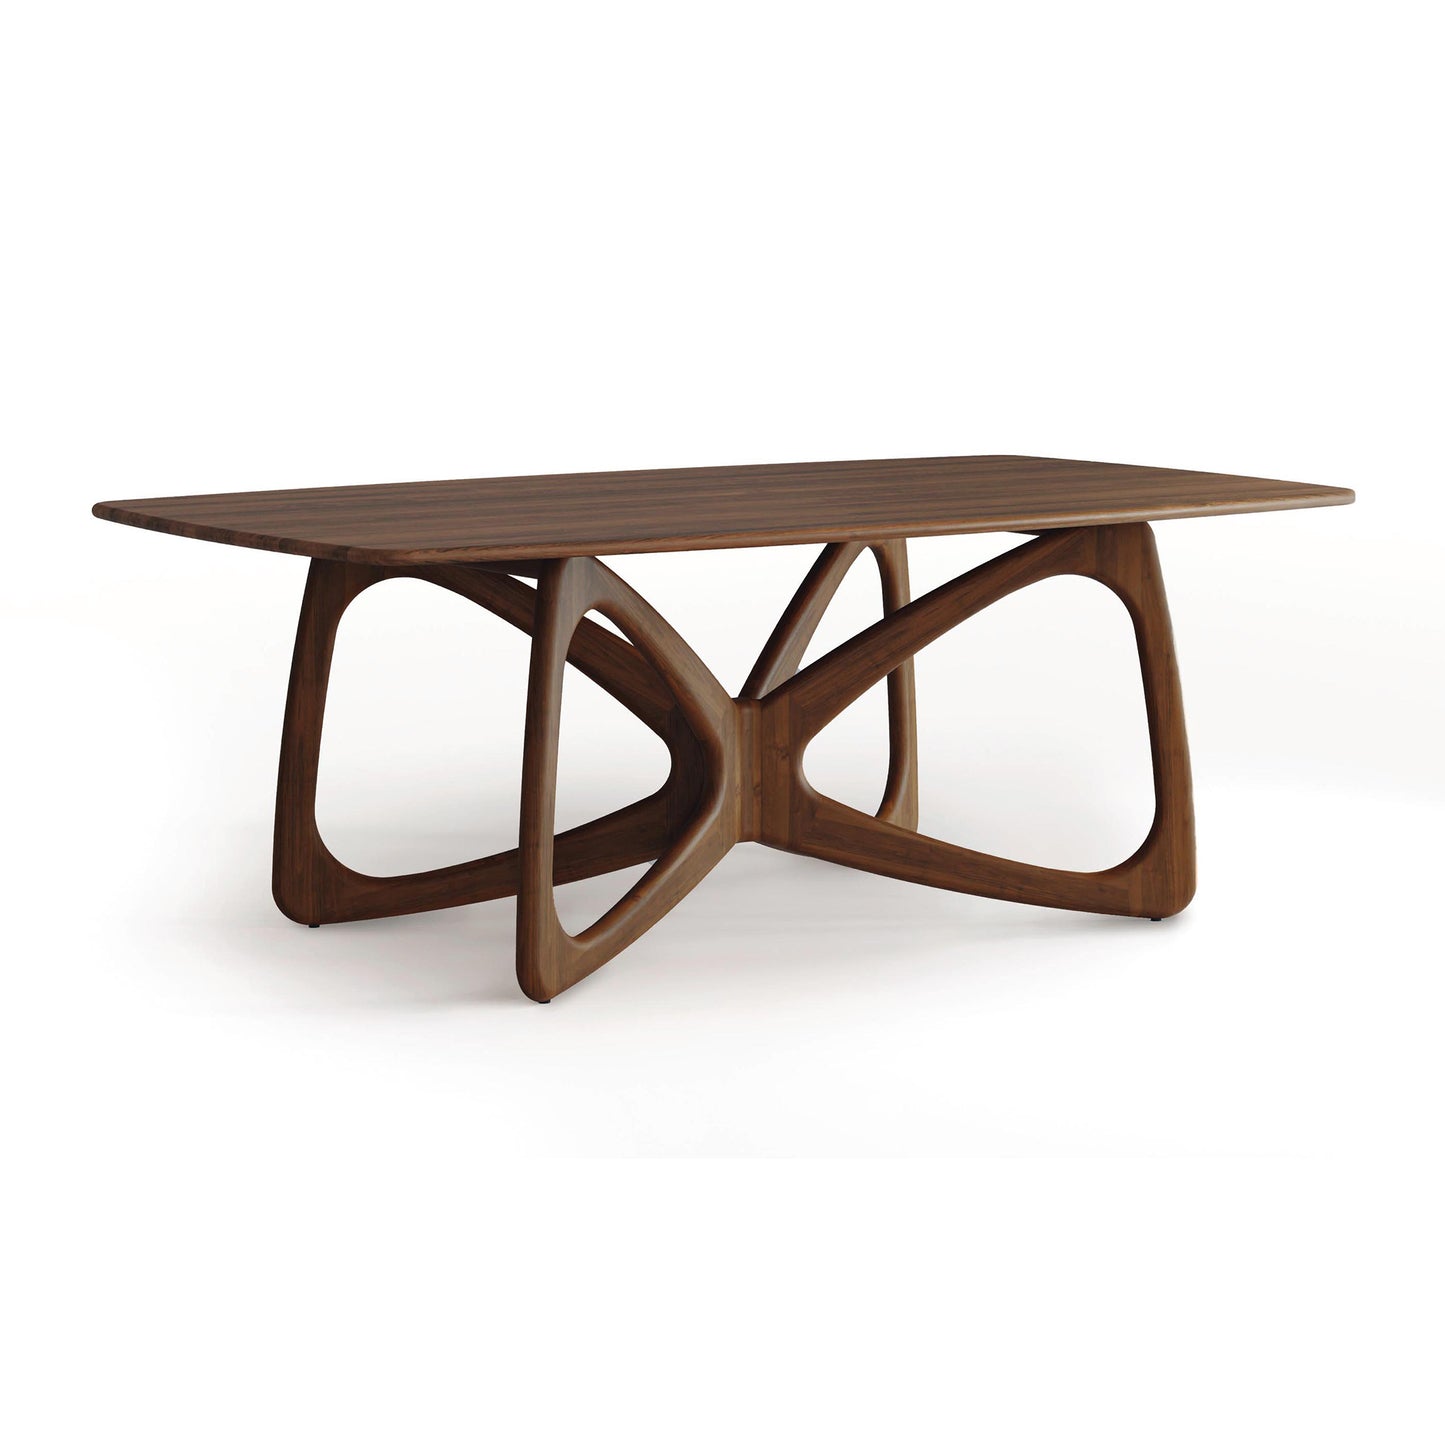 Alt text: Sustainable North American hardwood Copeland Furniture Butterfly Solid Top Dining Table with rectangular top, intricate curved interlocking supports, and modern geometric design. High-quality brown wooden table with smooth polished surface perfect for dining rooms.